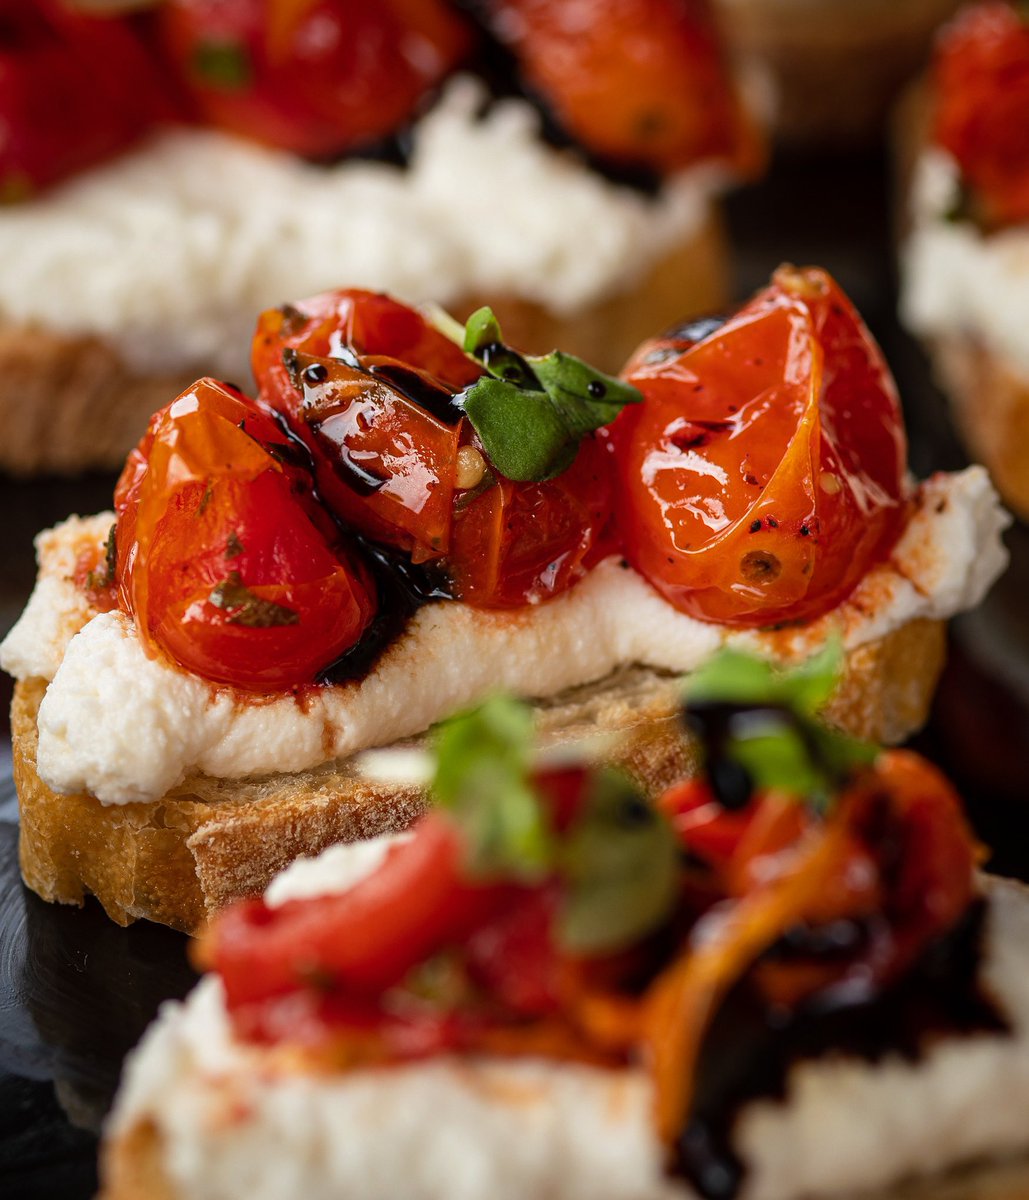 Behold...Bruschette with Roasted Tomatoes, Cow Ricotta, Balsamic and Micro Basil. 🤩